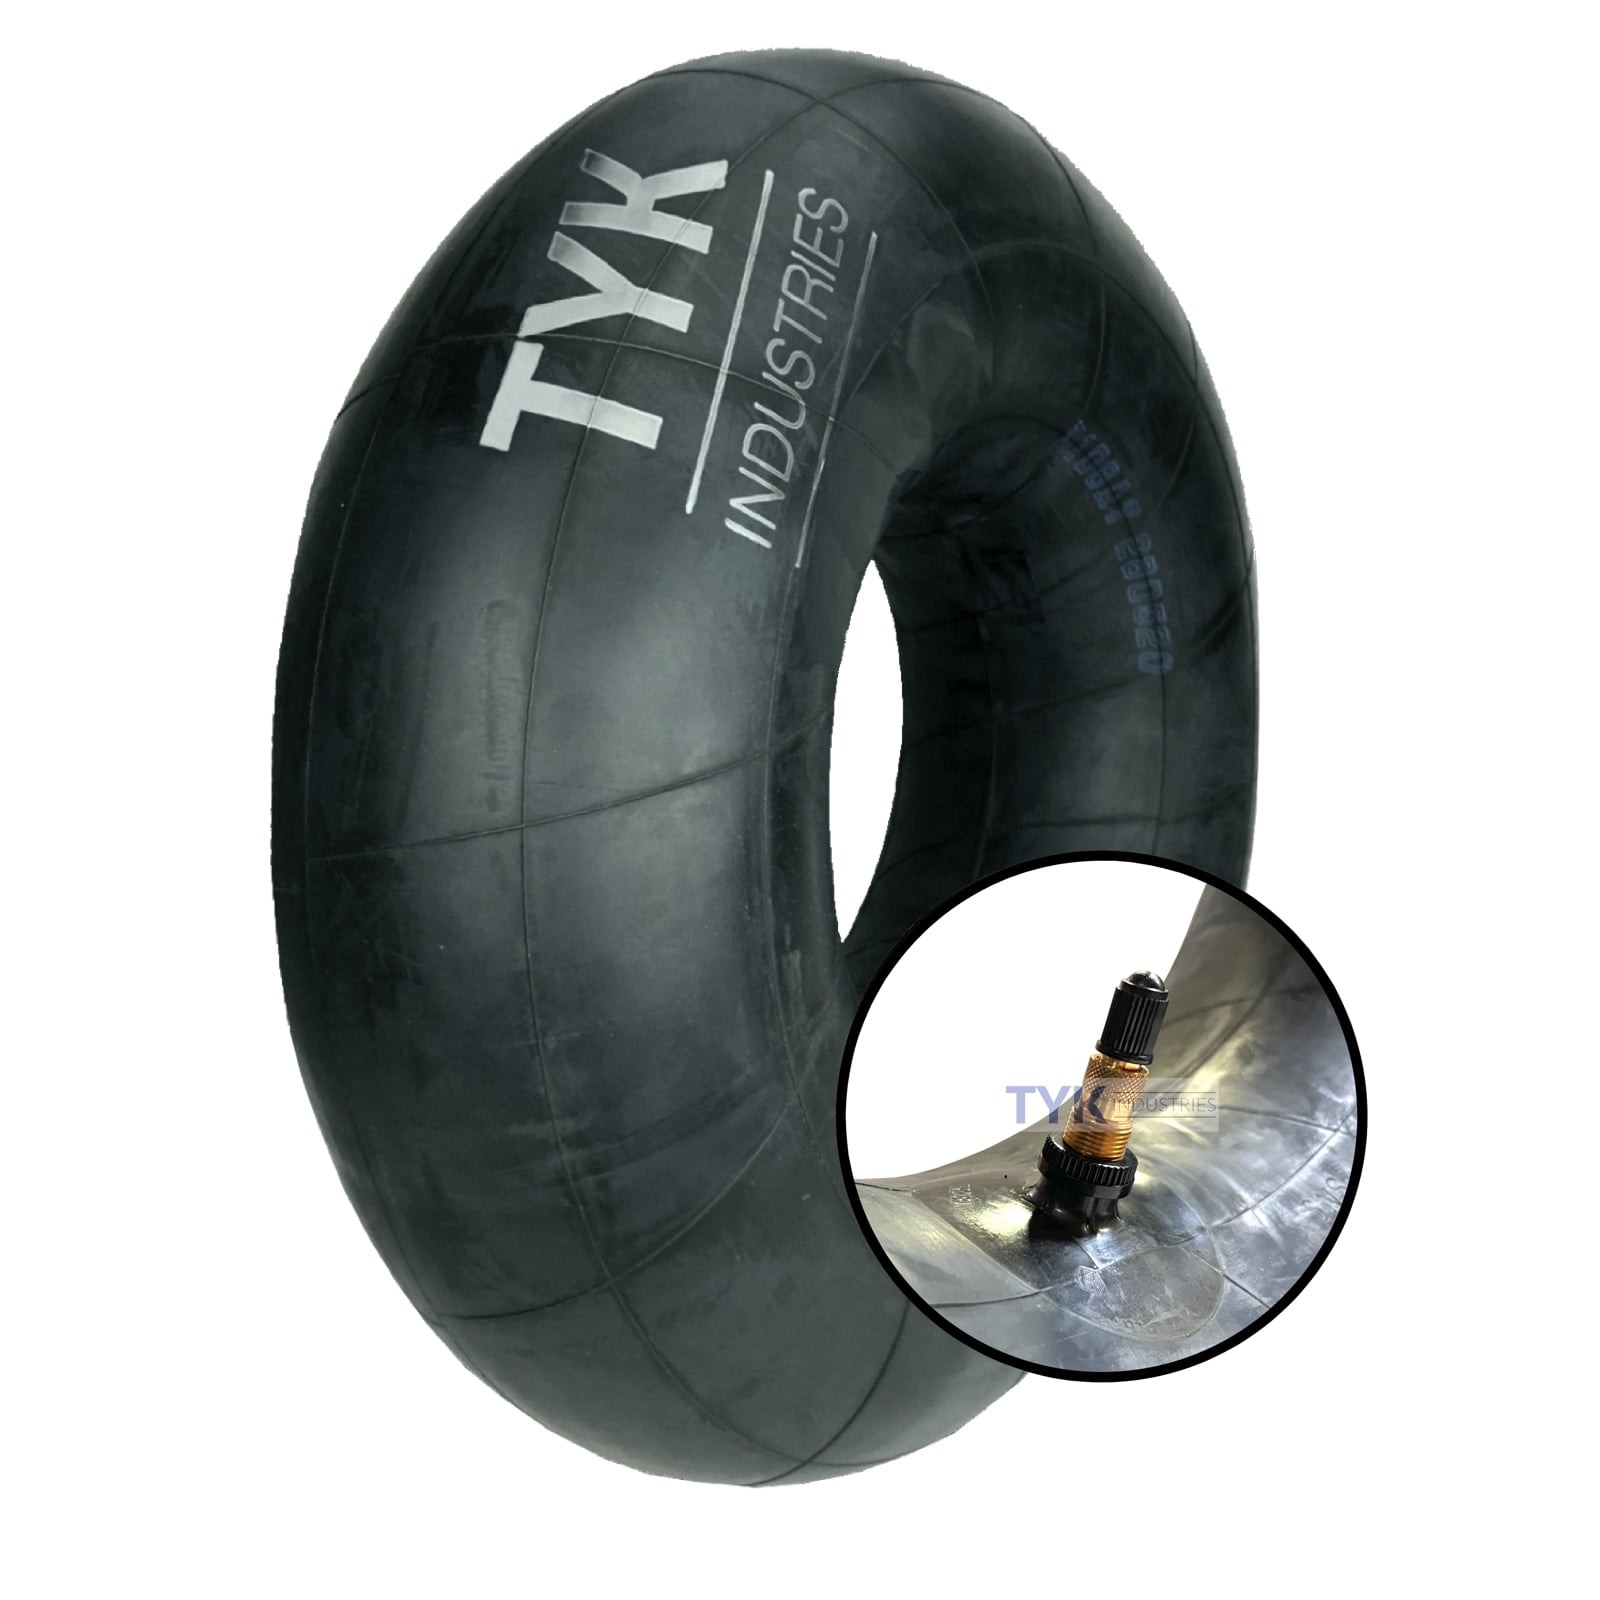 13 6 28 14 9 28 13 6r28 14 9r28 Farm Tractor Tire Tube For Radial Or Bias Tires With A Tr218 Valve Stem By Tyk Industries Walmart Com